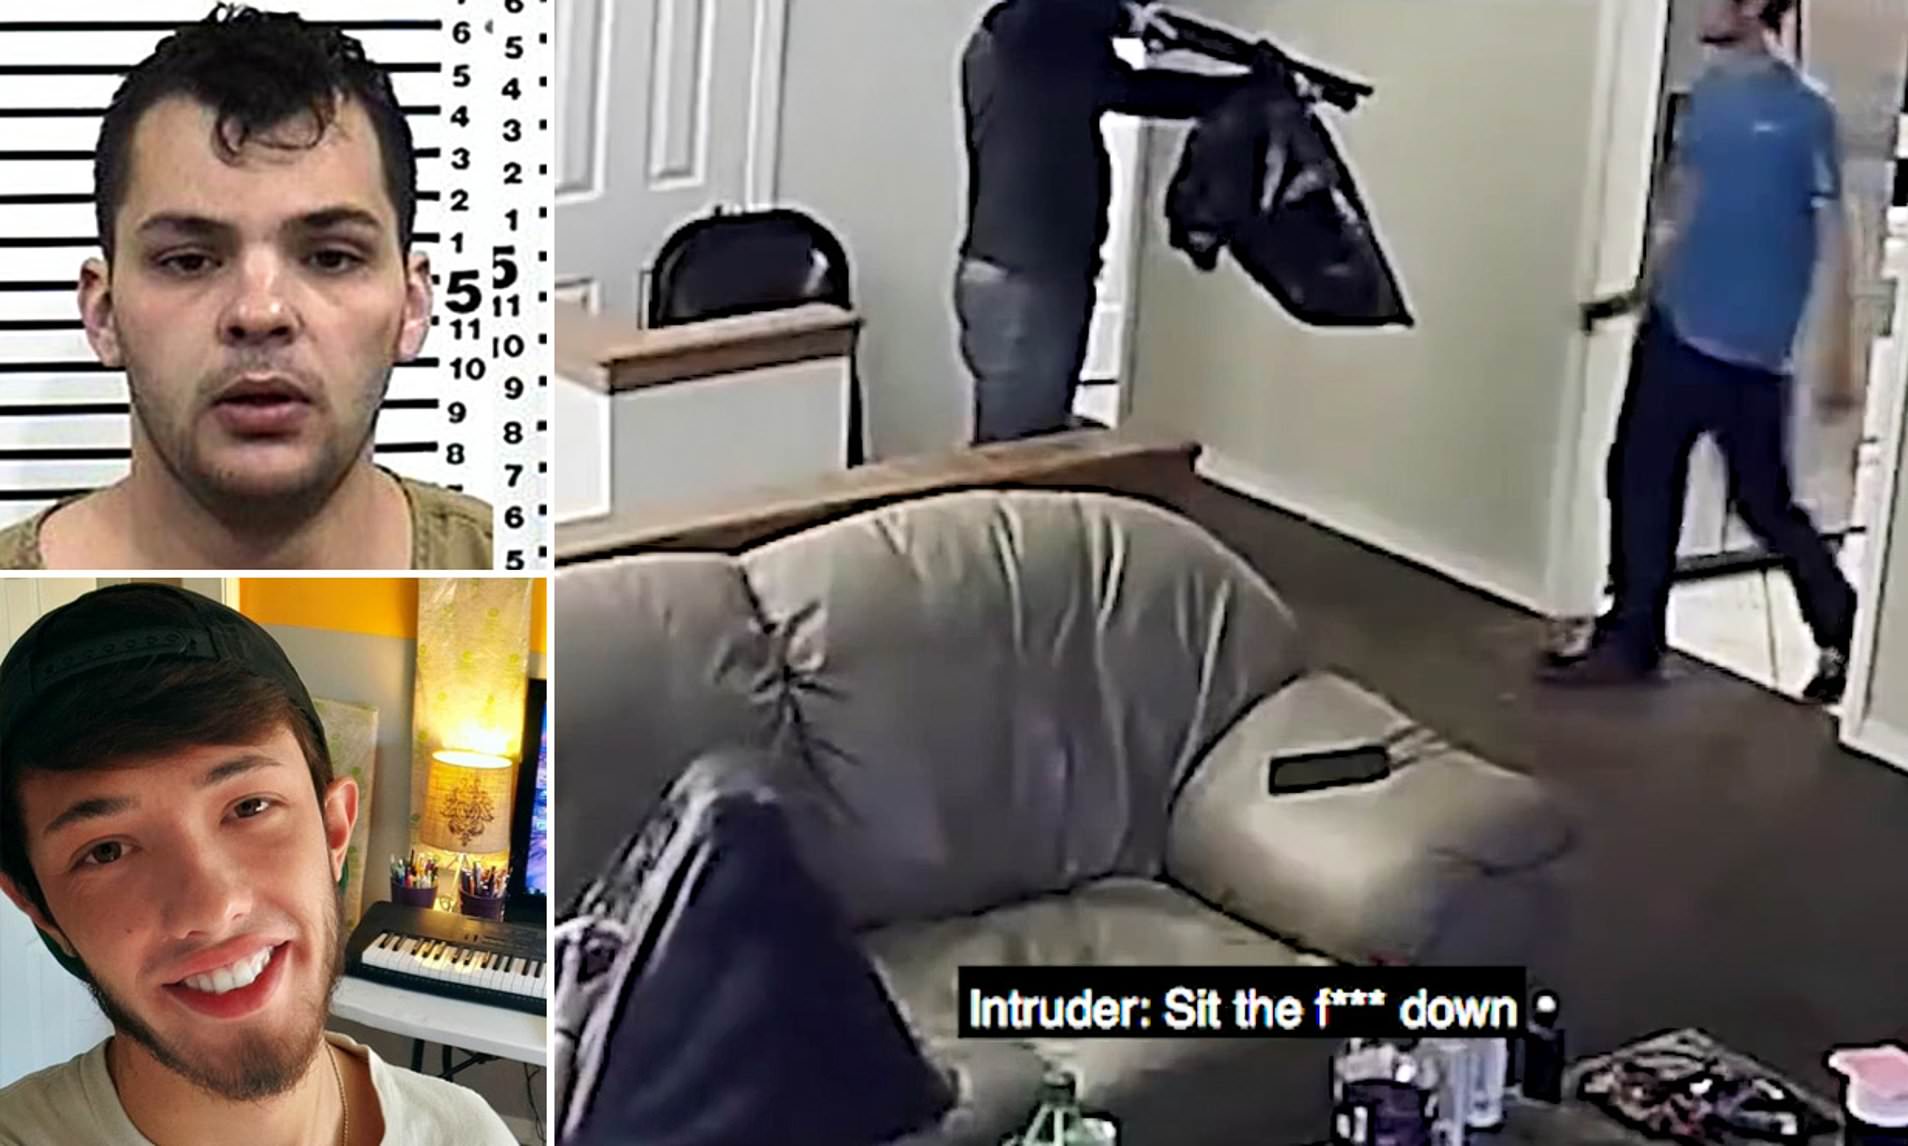 'Wrong house buster!' Shocking moment a homeowner fends off a shotgun-wielding thief who broke into the apartment looking for drugs, as his fiancée huddles in terror on the sofa